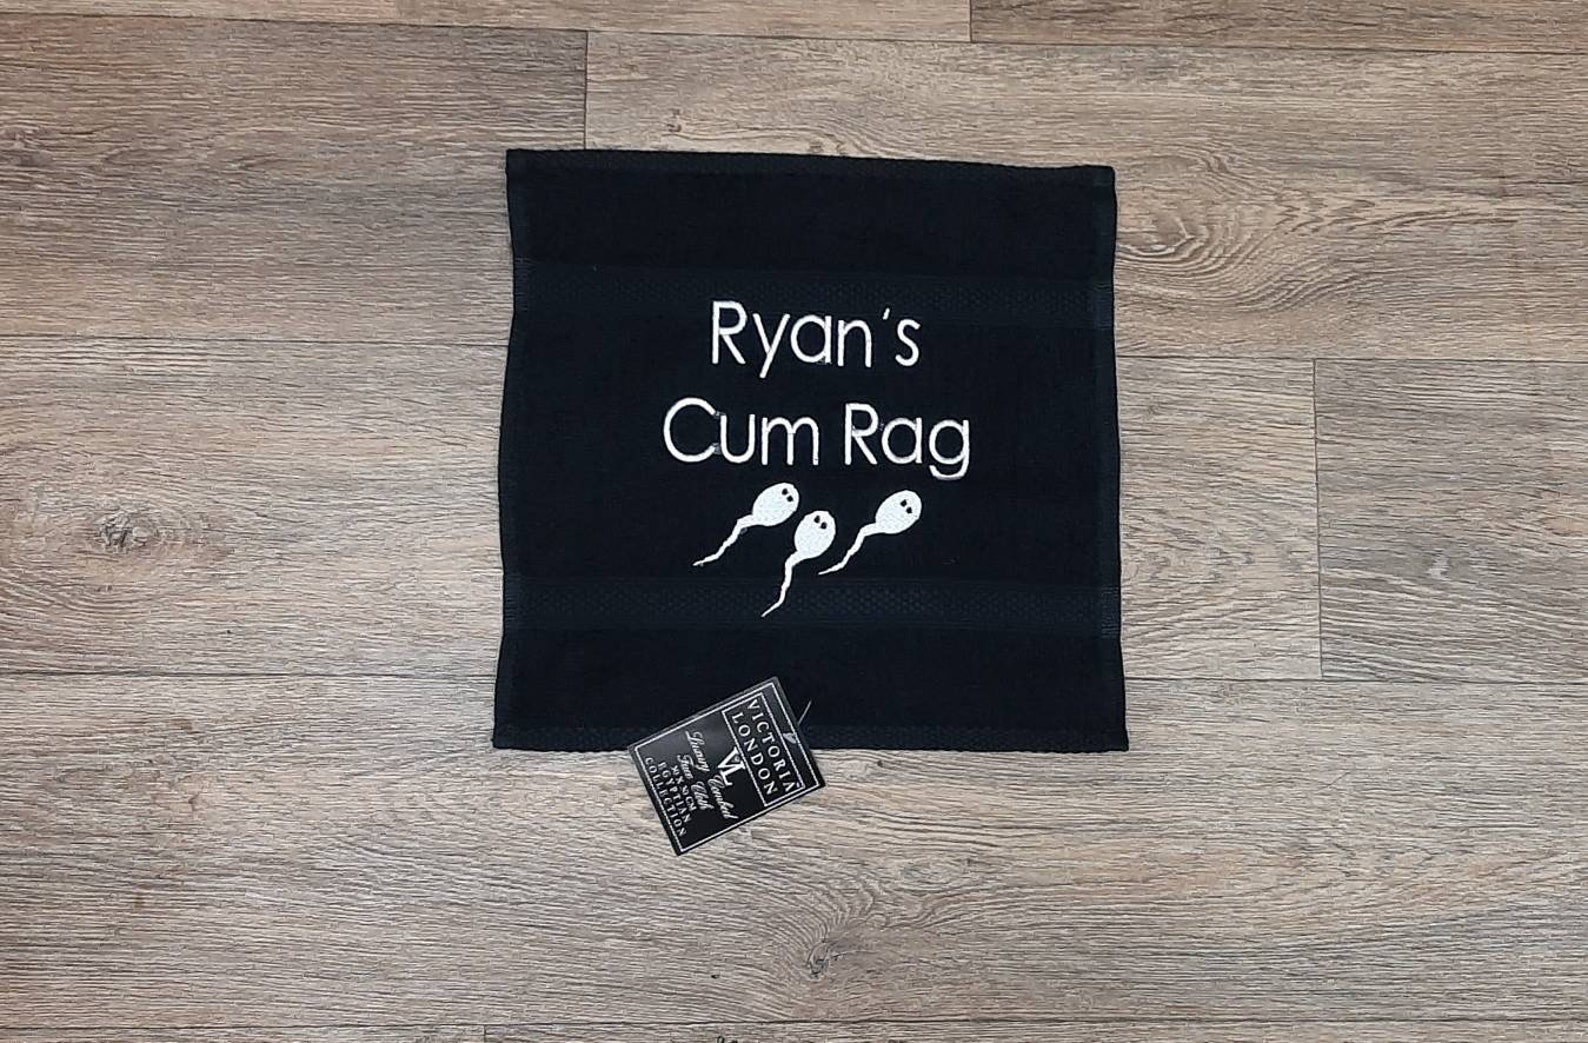 cum rag, fun gift for him.This image shows a personalised gift for him,. This image is a black cloth with printed text in white. Displayed on the www.the-personalisation-company.co.uk website. Personalised gifts for him.